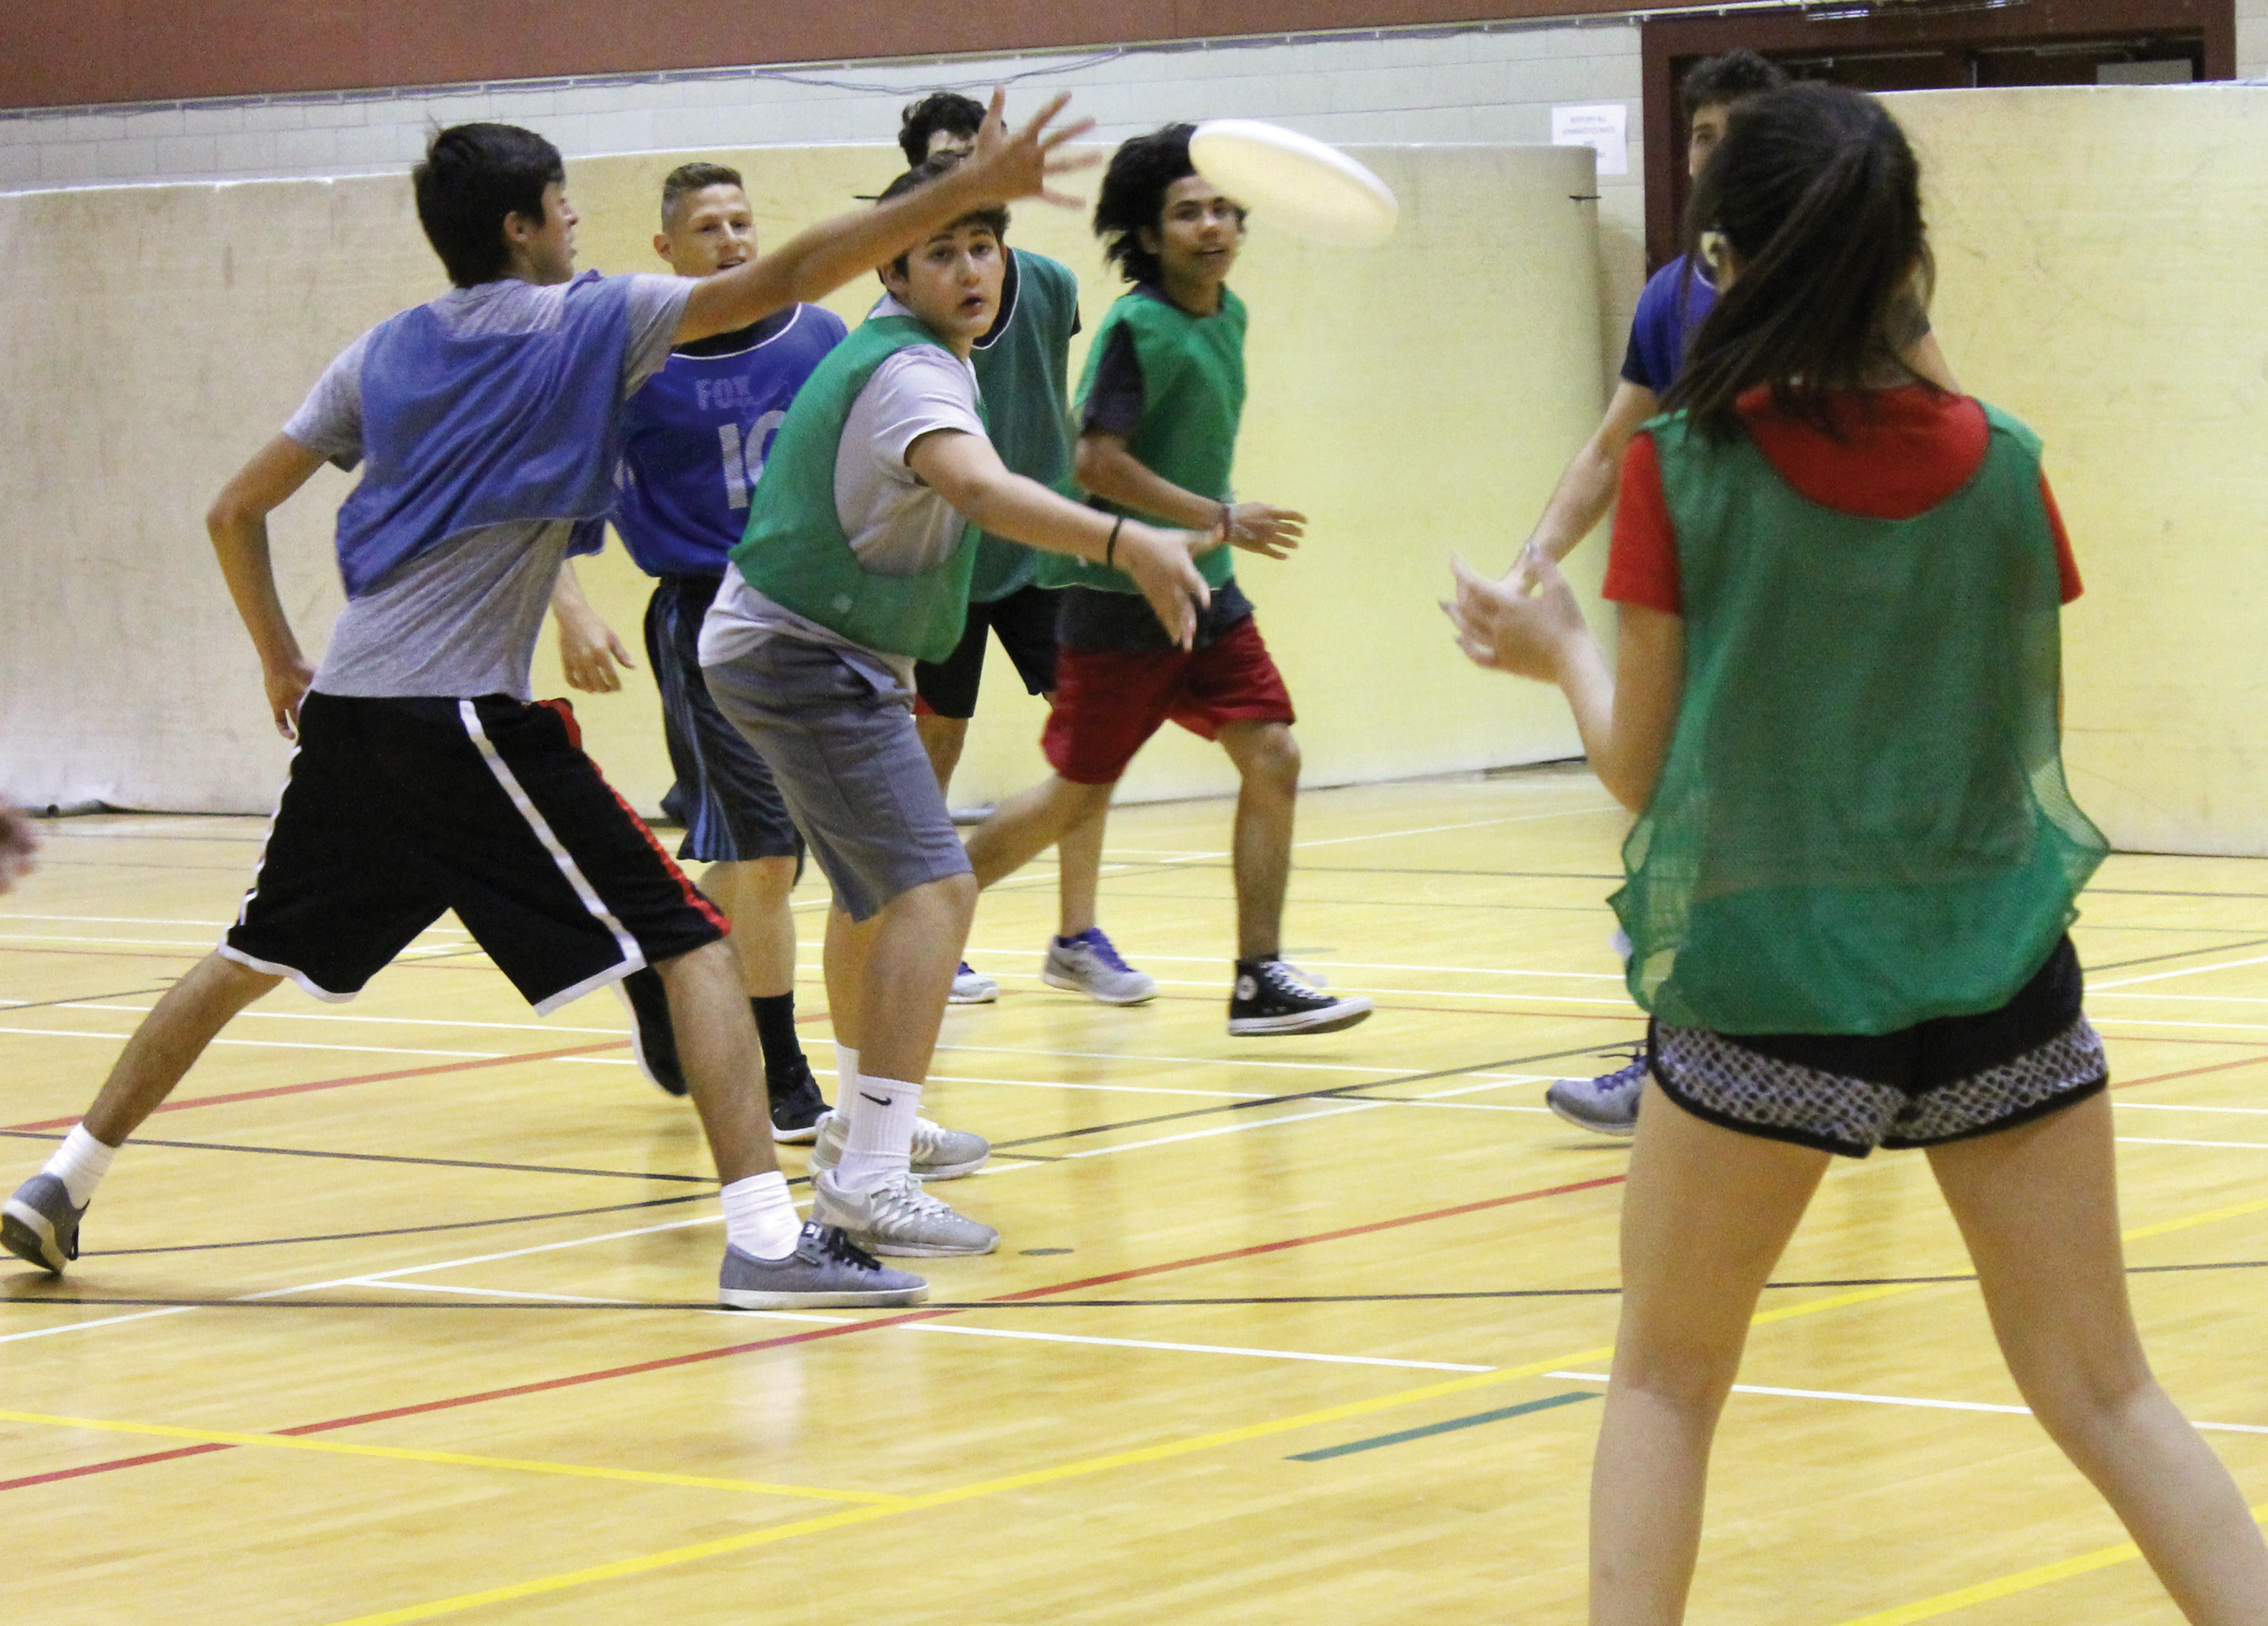 Ultimate Frisbee players prep for tournament